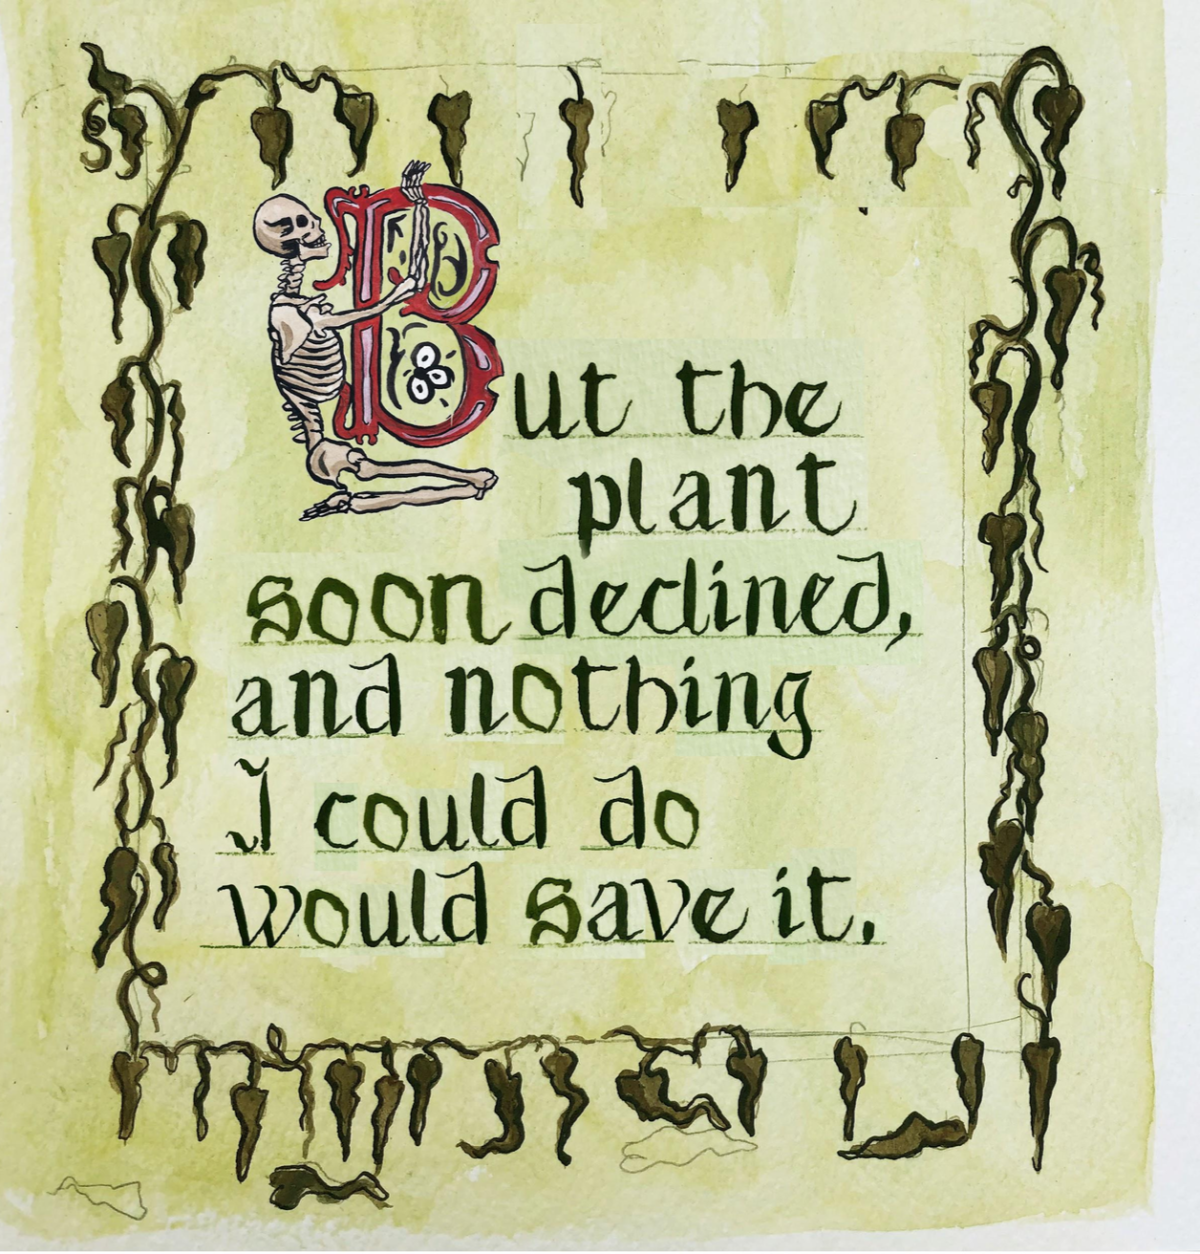 "But the plant soon declined and nothing i could do would save it."